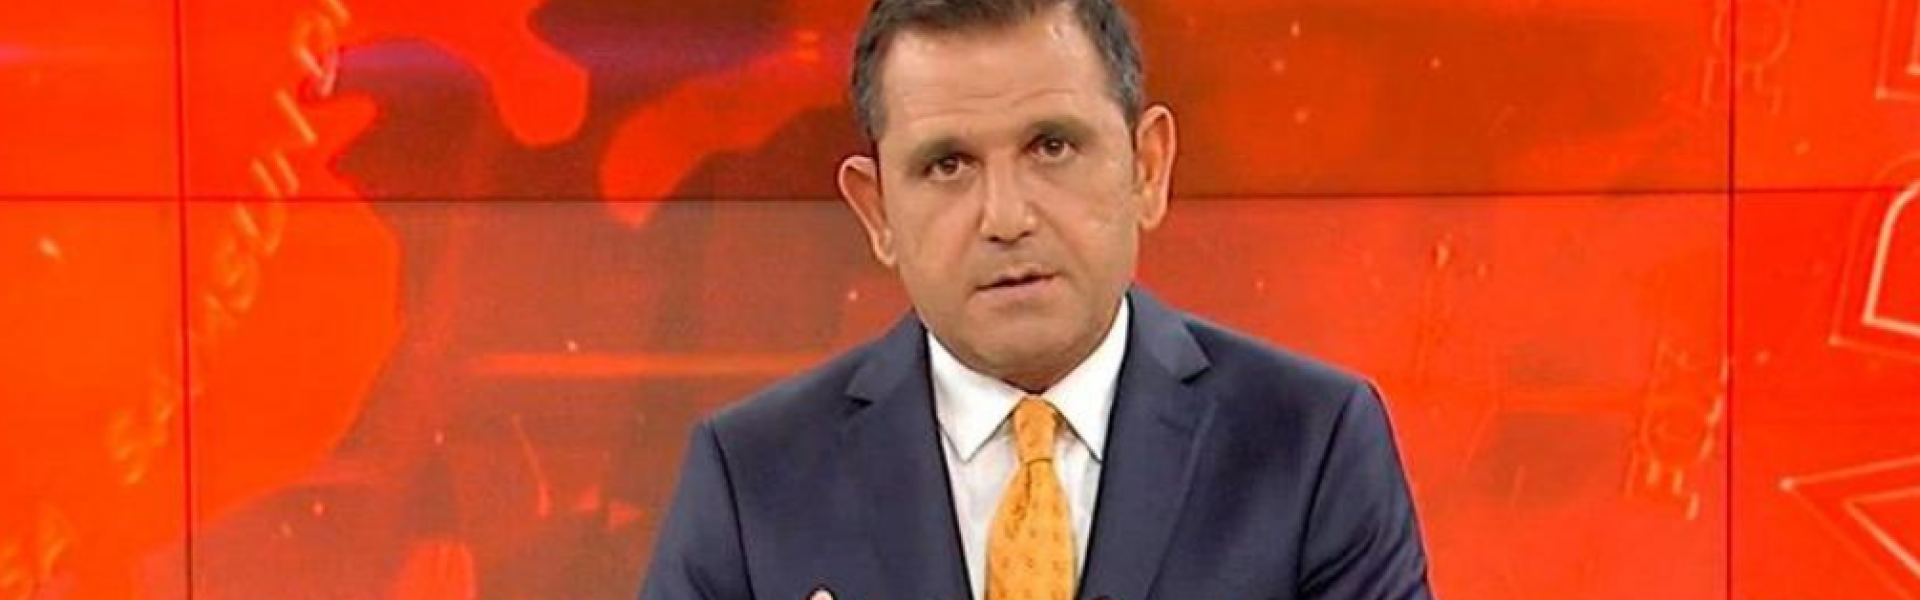 Turkey’s top news anchor steps down after spat with Erdoğan 1